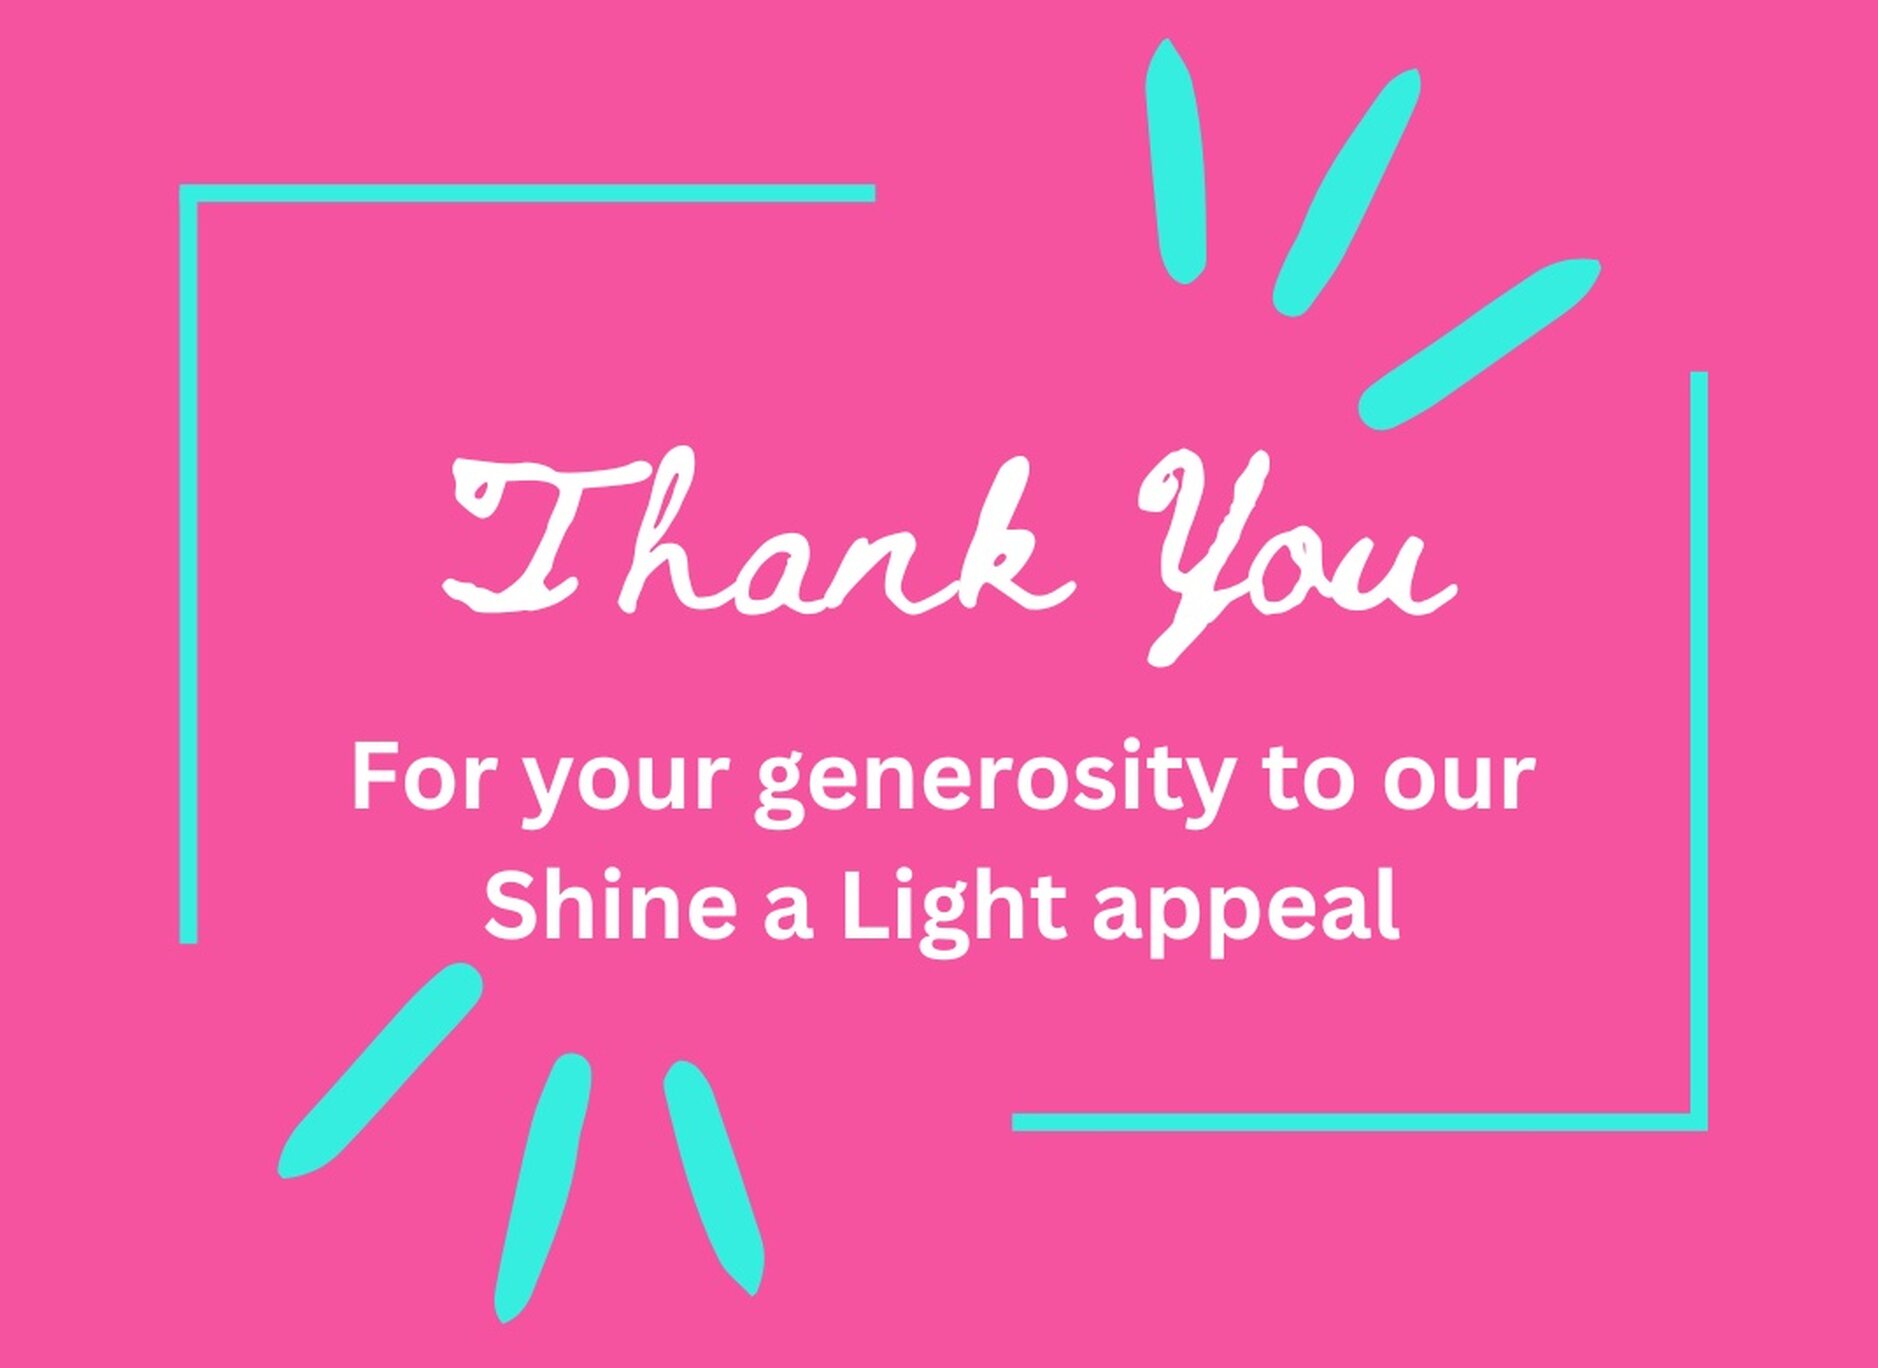 Shine a Light Appeal for Al Ahli Hospital – Thank You - A message from the Archbishop of Dublin.